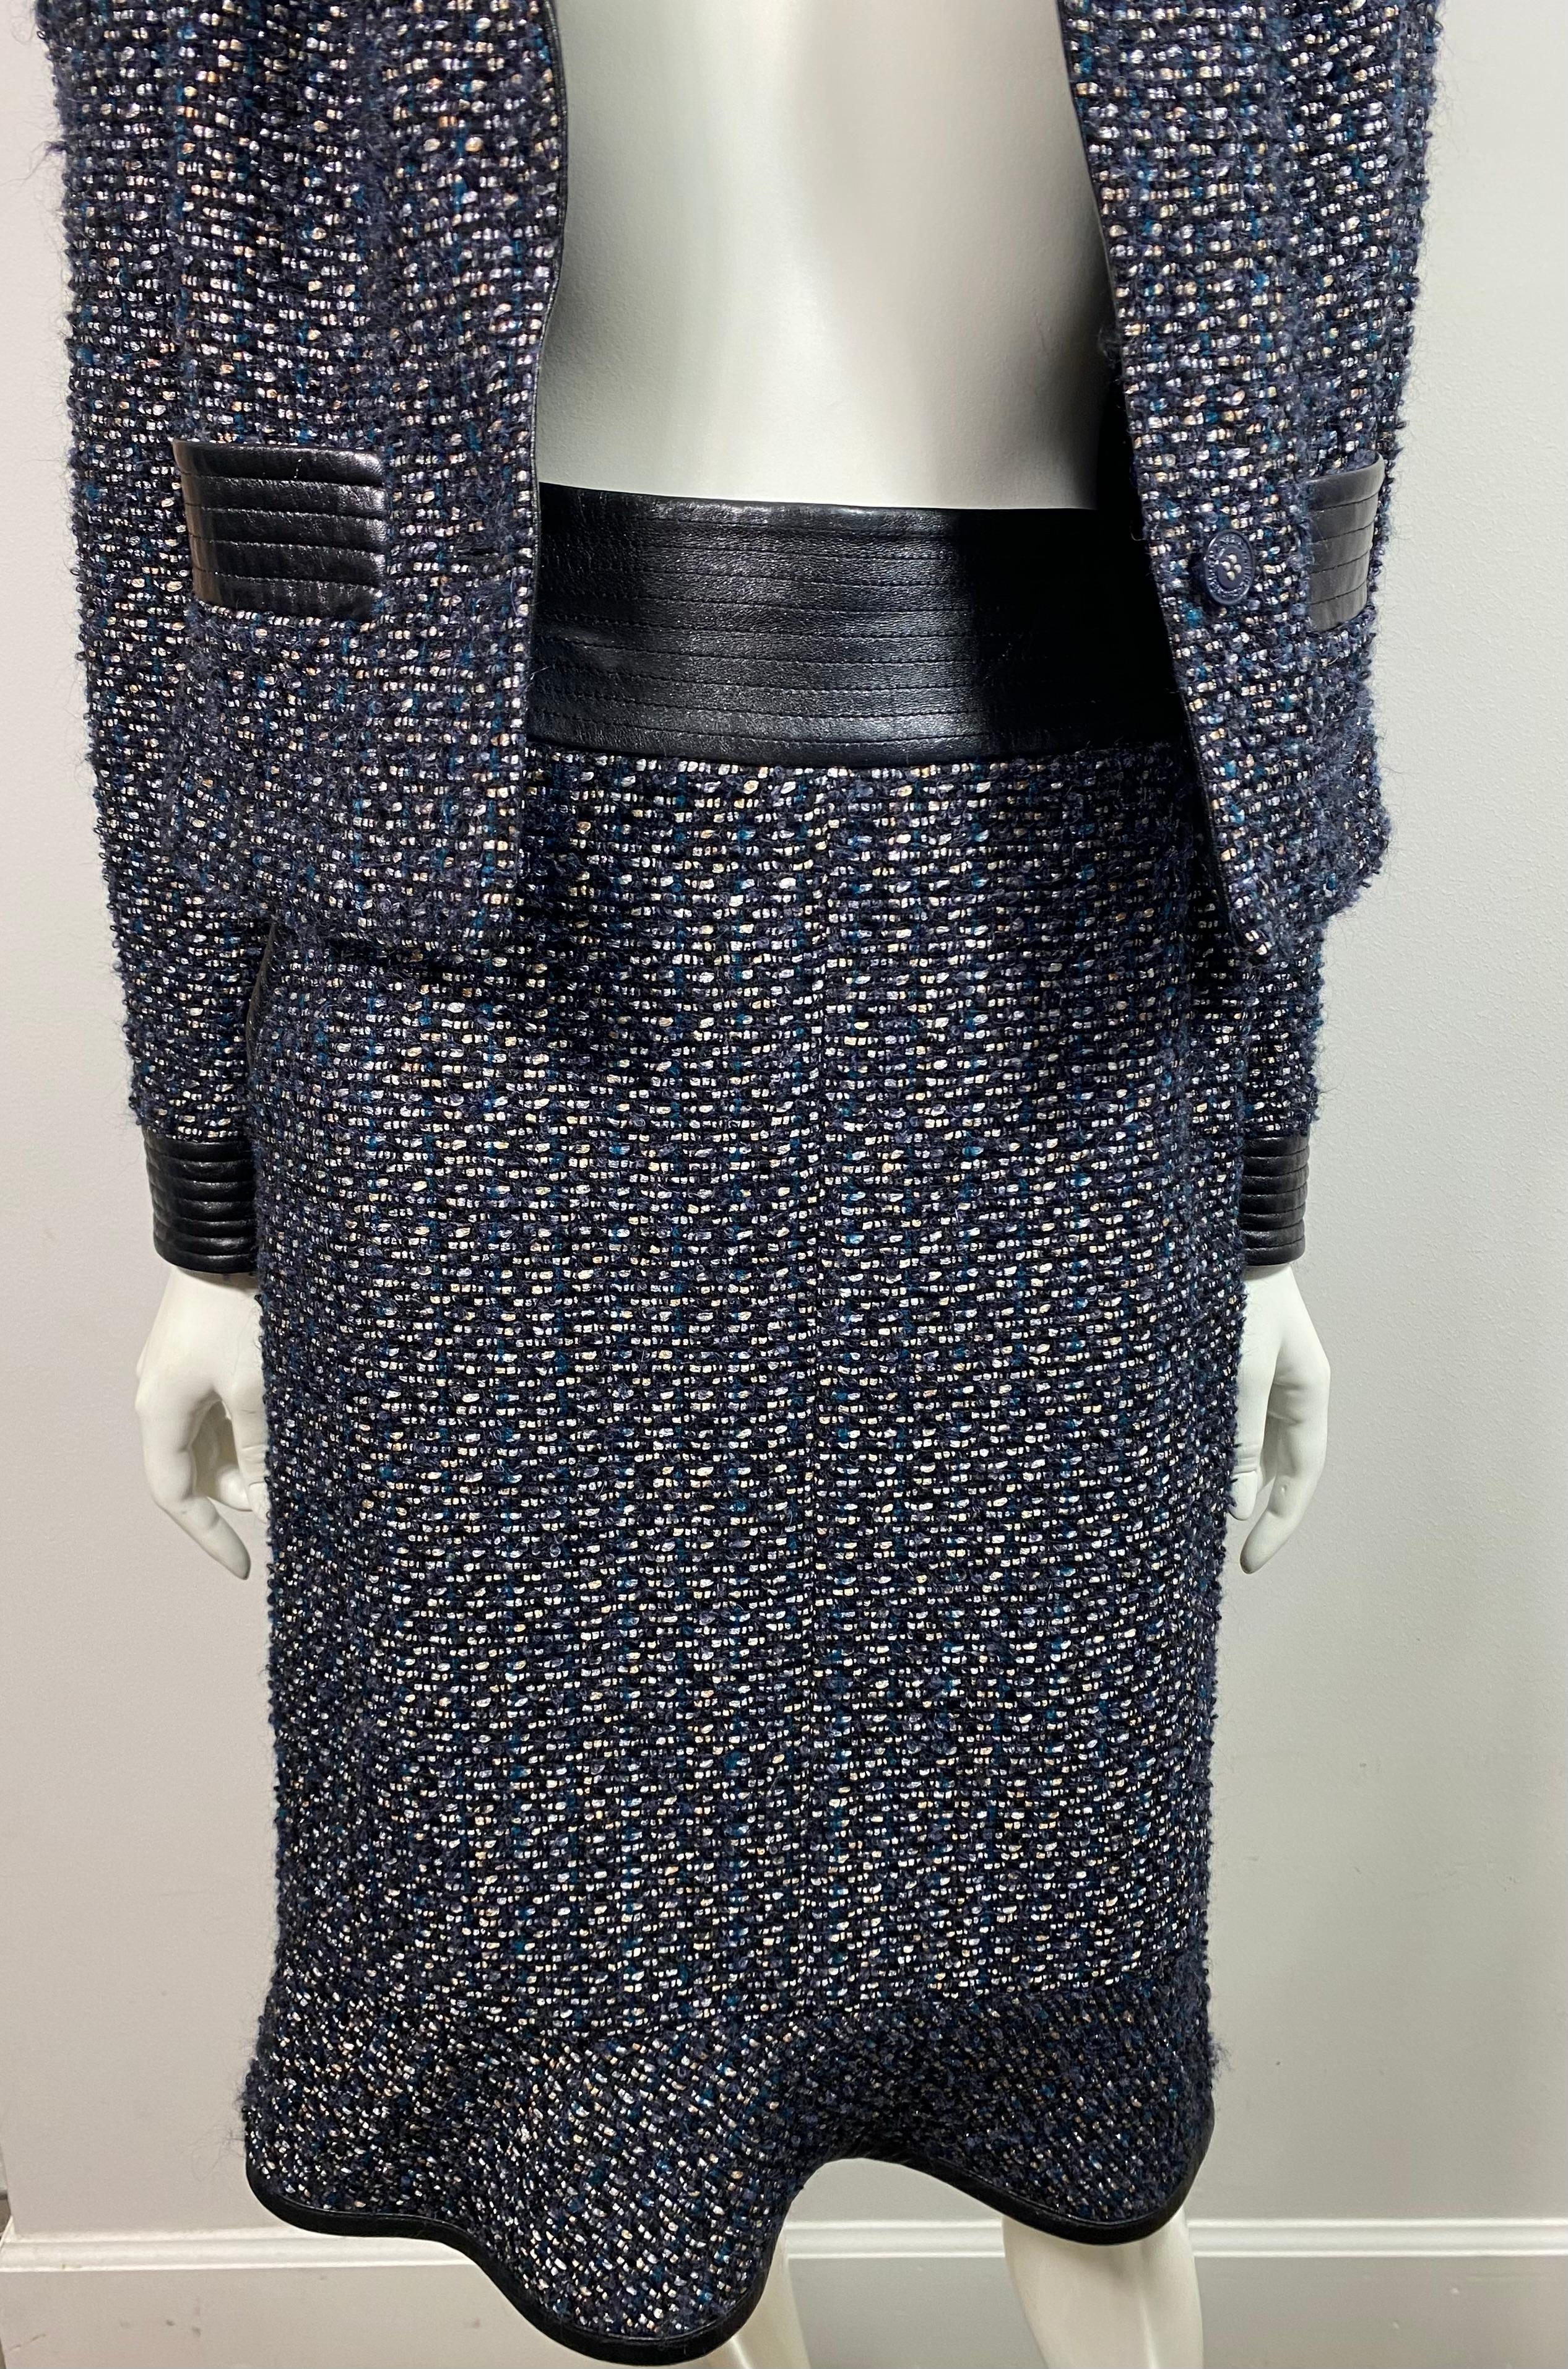 Chanel Runway Fall 2002 Navy Tweed and Black Leather Skirt Suit - Size 40  For Sale 8